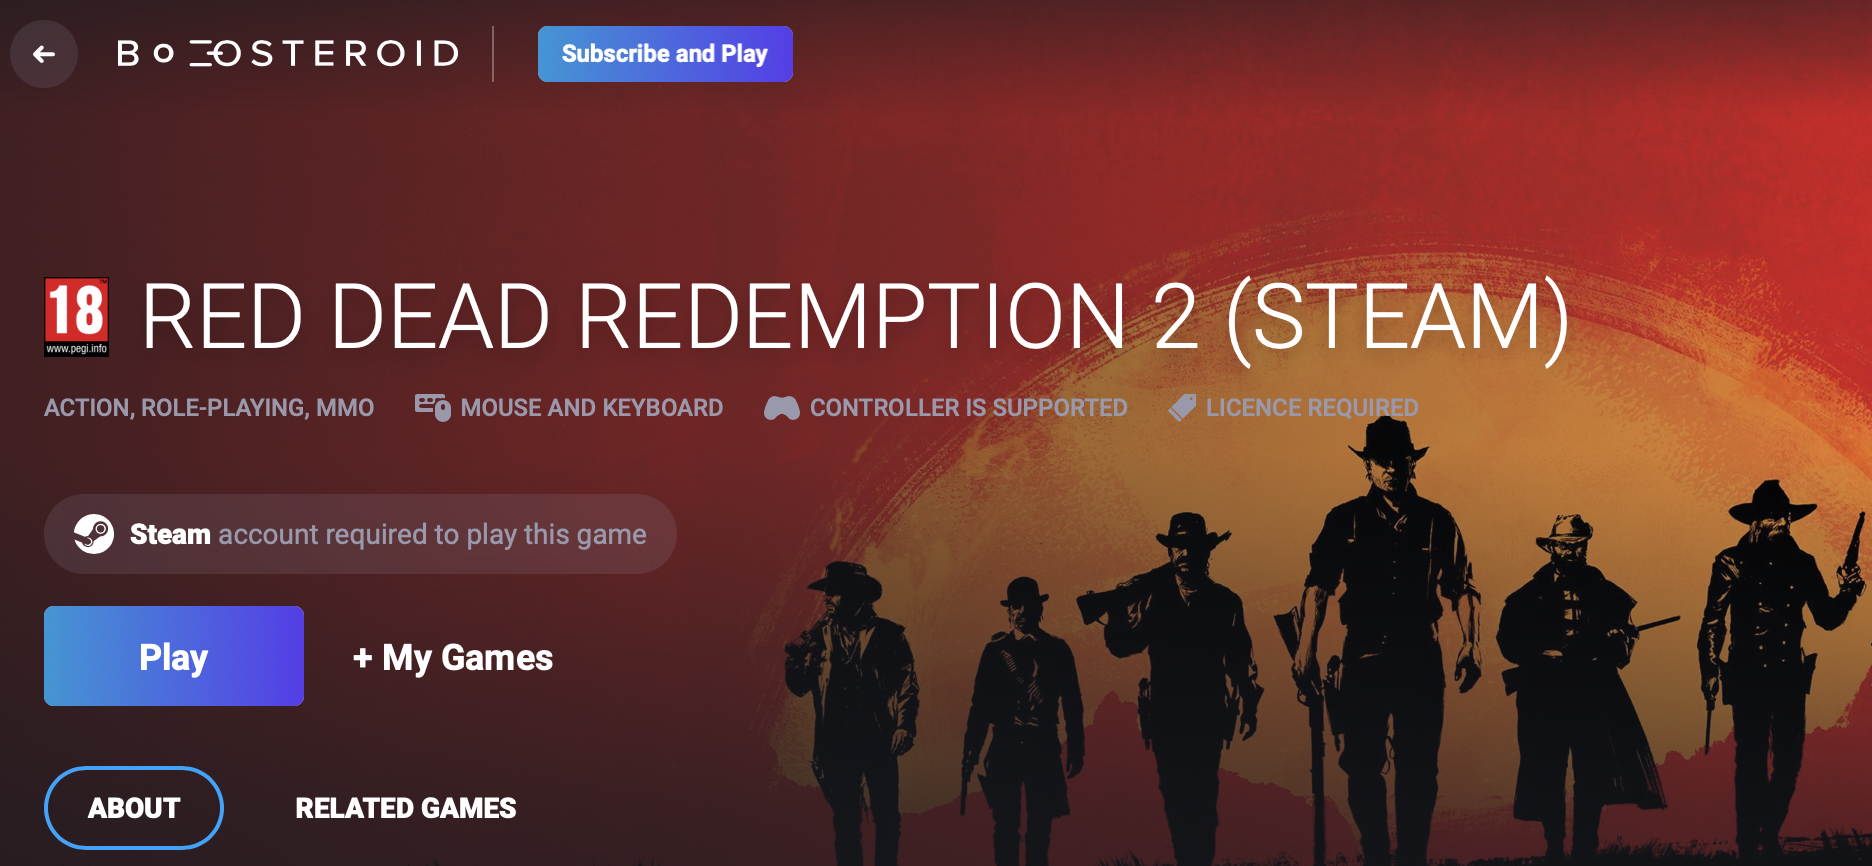 Download and Play Red Dead Redemption on Mac - Mac Research